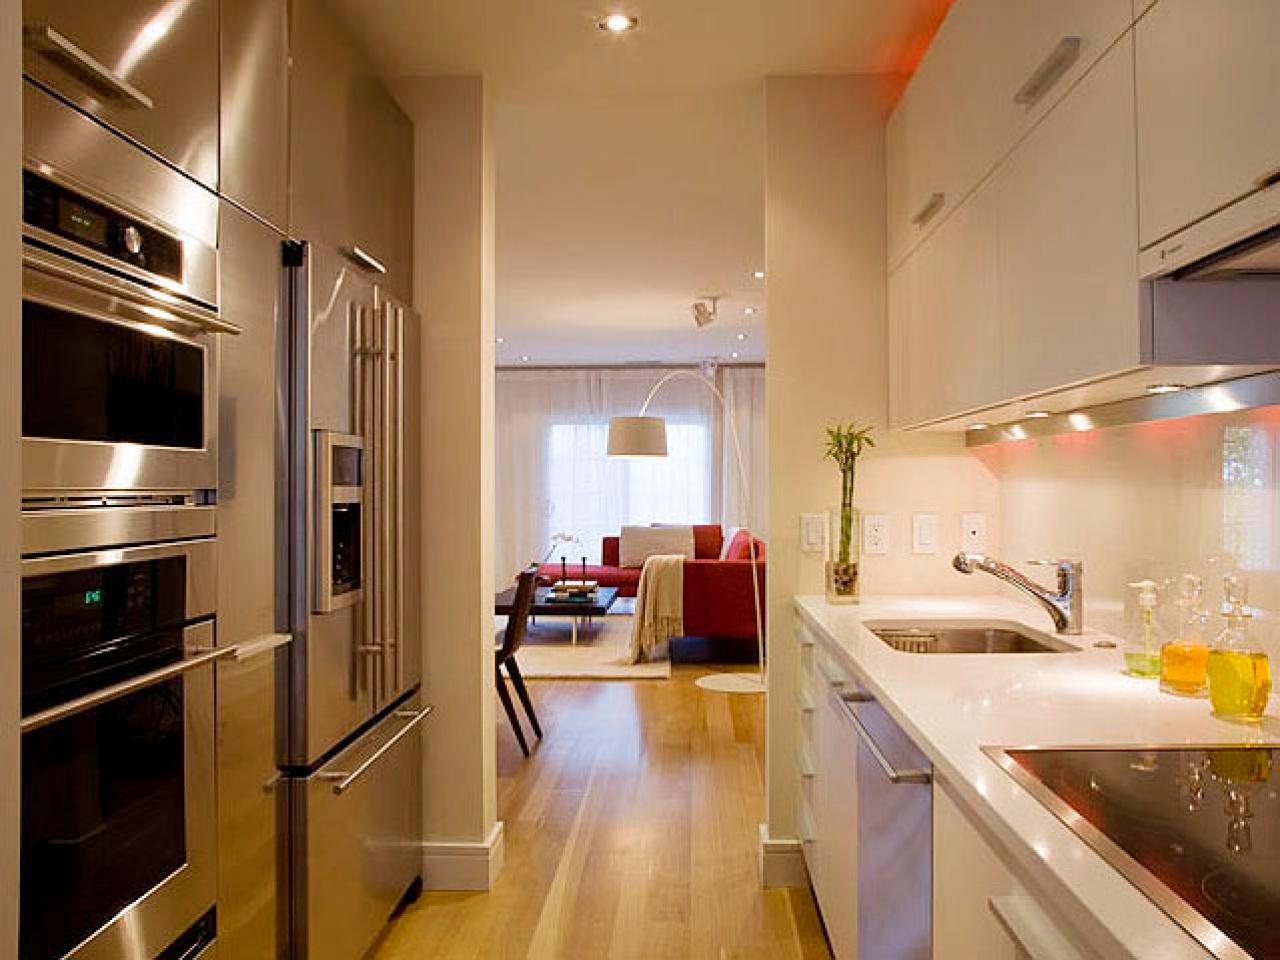 galley-kitchen-design-with-white-glossy-cabinet-on-cream-laminate-wood-floor.jpeg